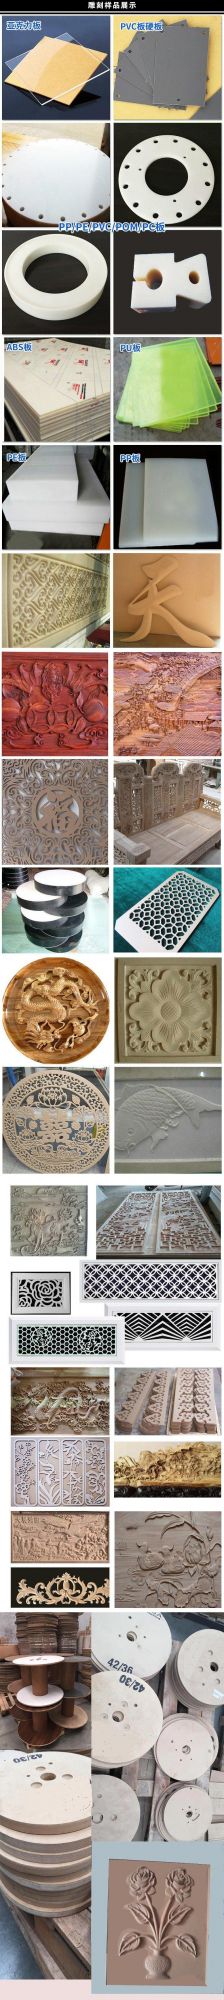 1325 CNC Router Machine Price CNC Router Wood Carving Machine